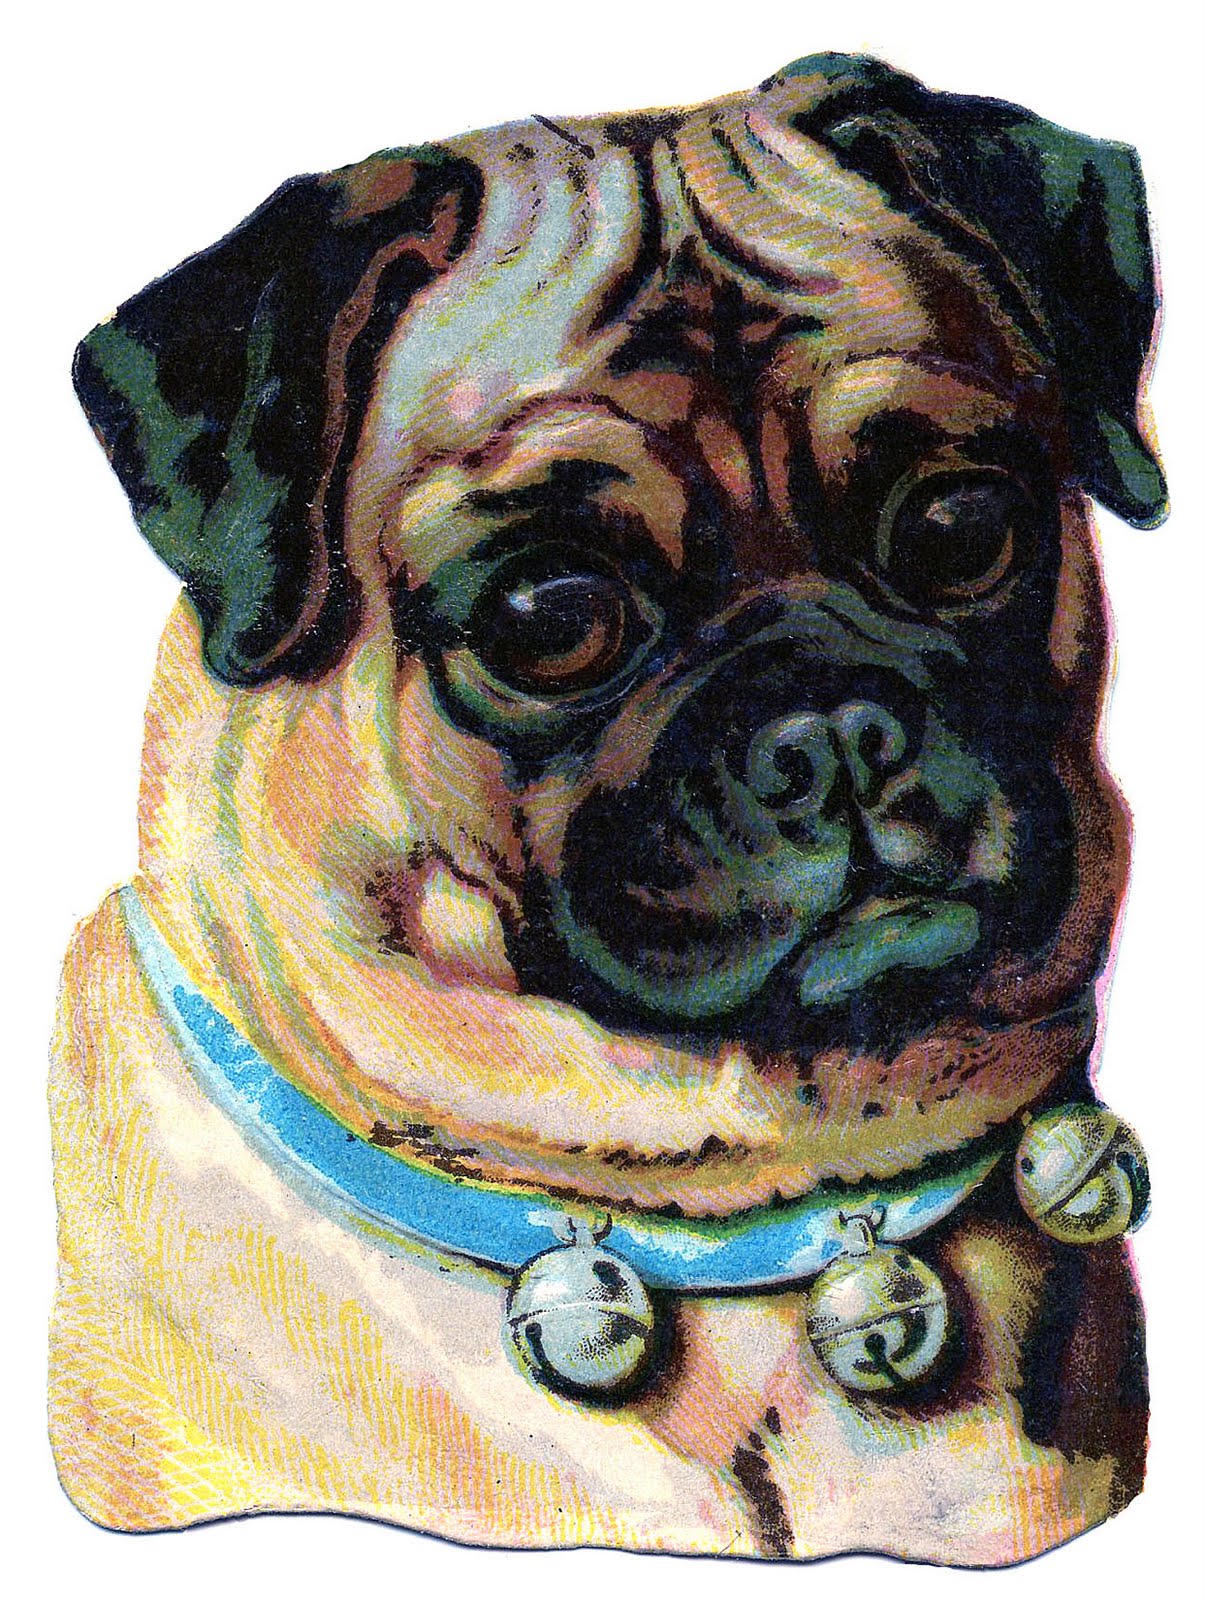 Vintage Clip Art - Darling Pug - The Graphics Fairy